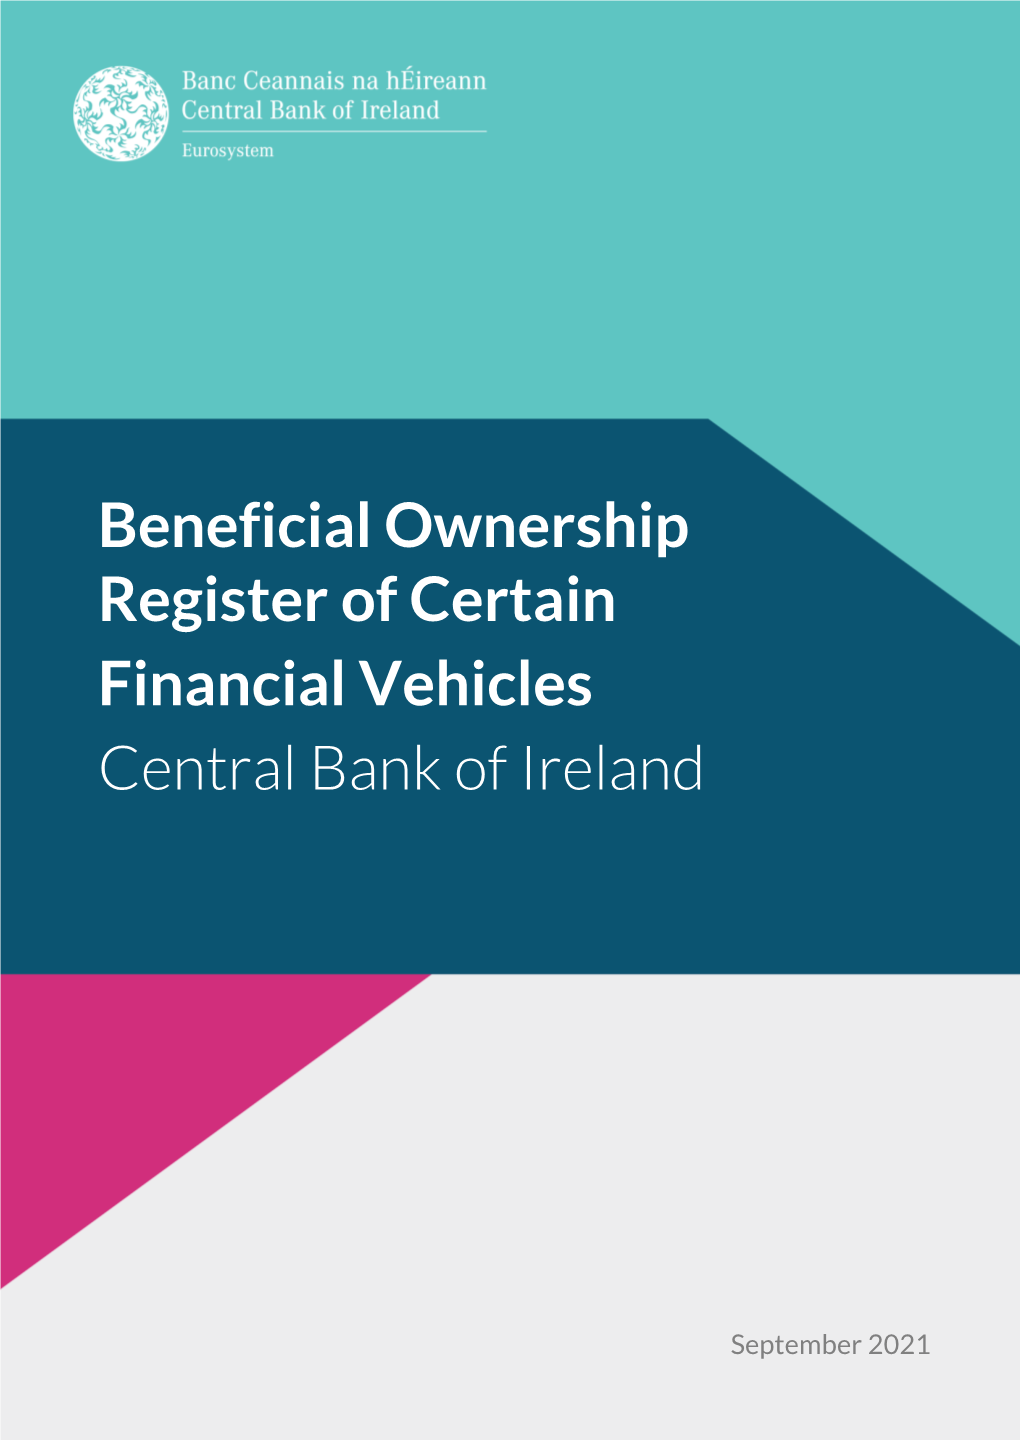 Beneficial Ownership Register for Certain Financial Vehicles on the Website of the Central Bank of Ireland